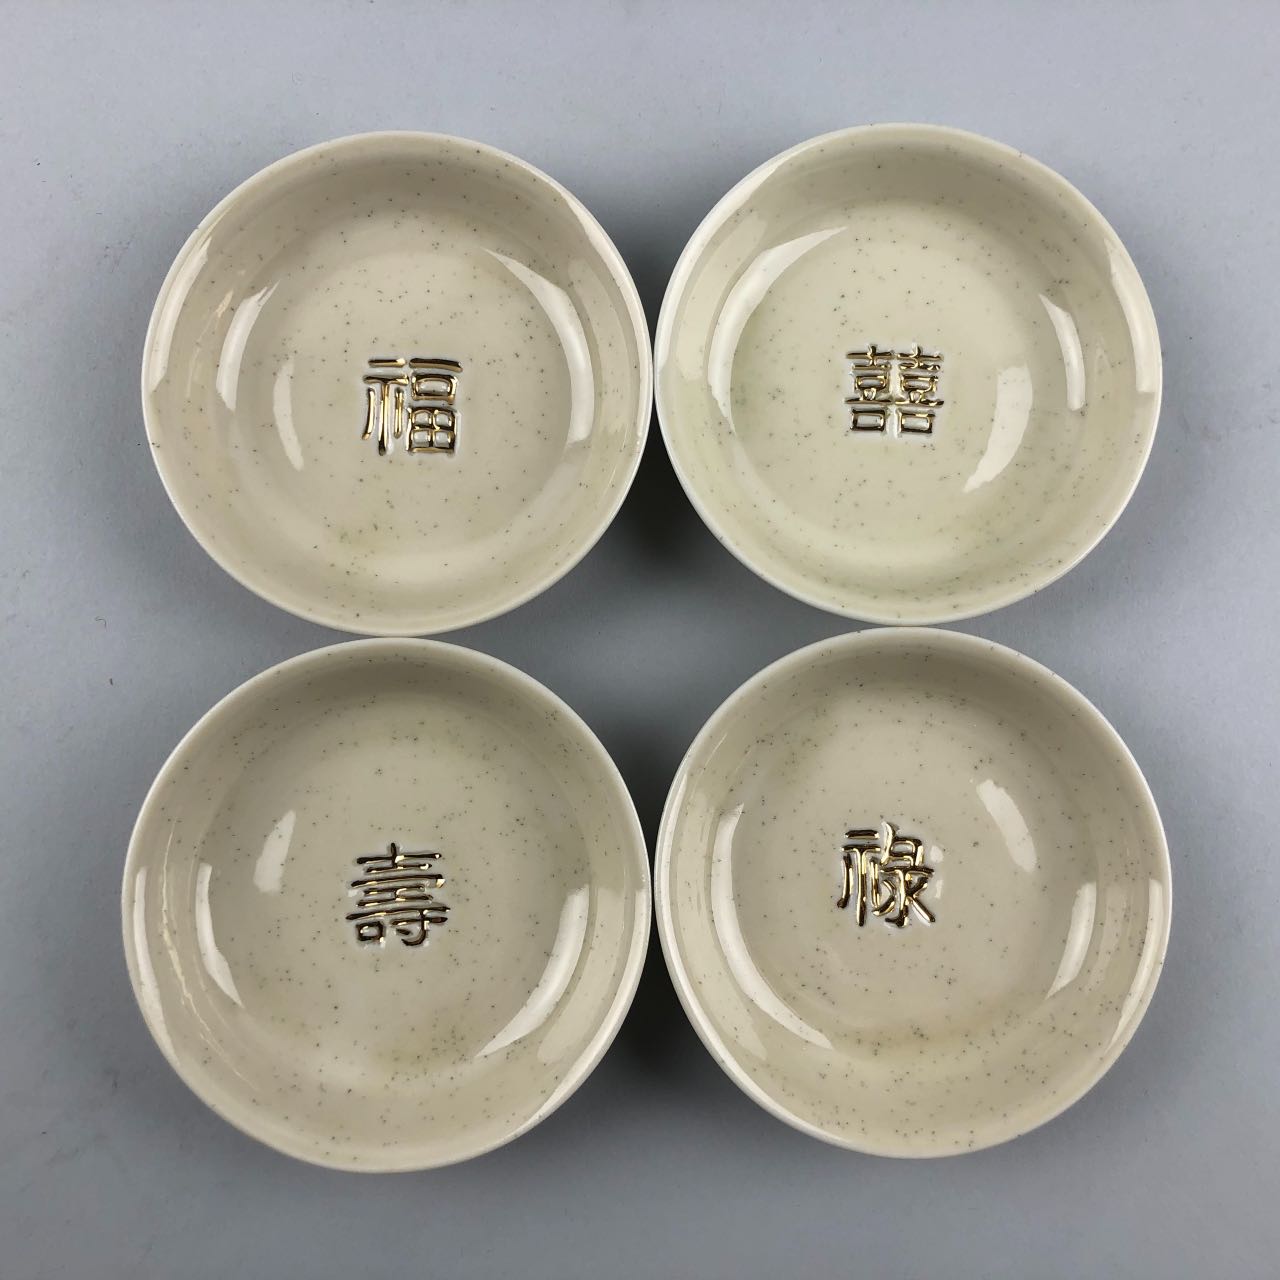 Gold Chinese Letter 福 禄 寿 喜 Japanese small seasoning sauce dishes Restaurant Supply Bowery Discount Sale OSARA New York